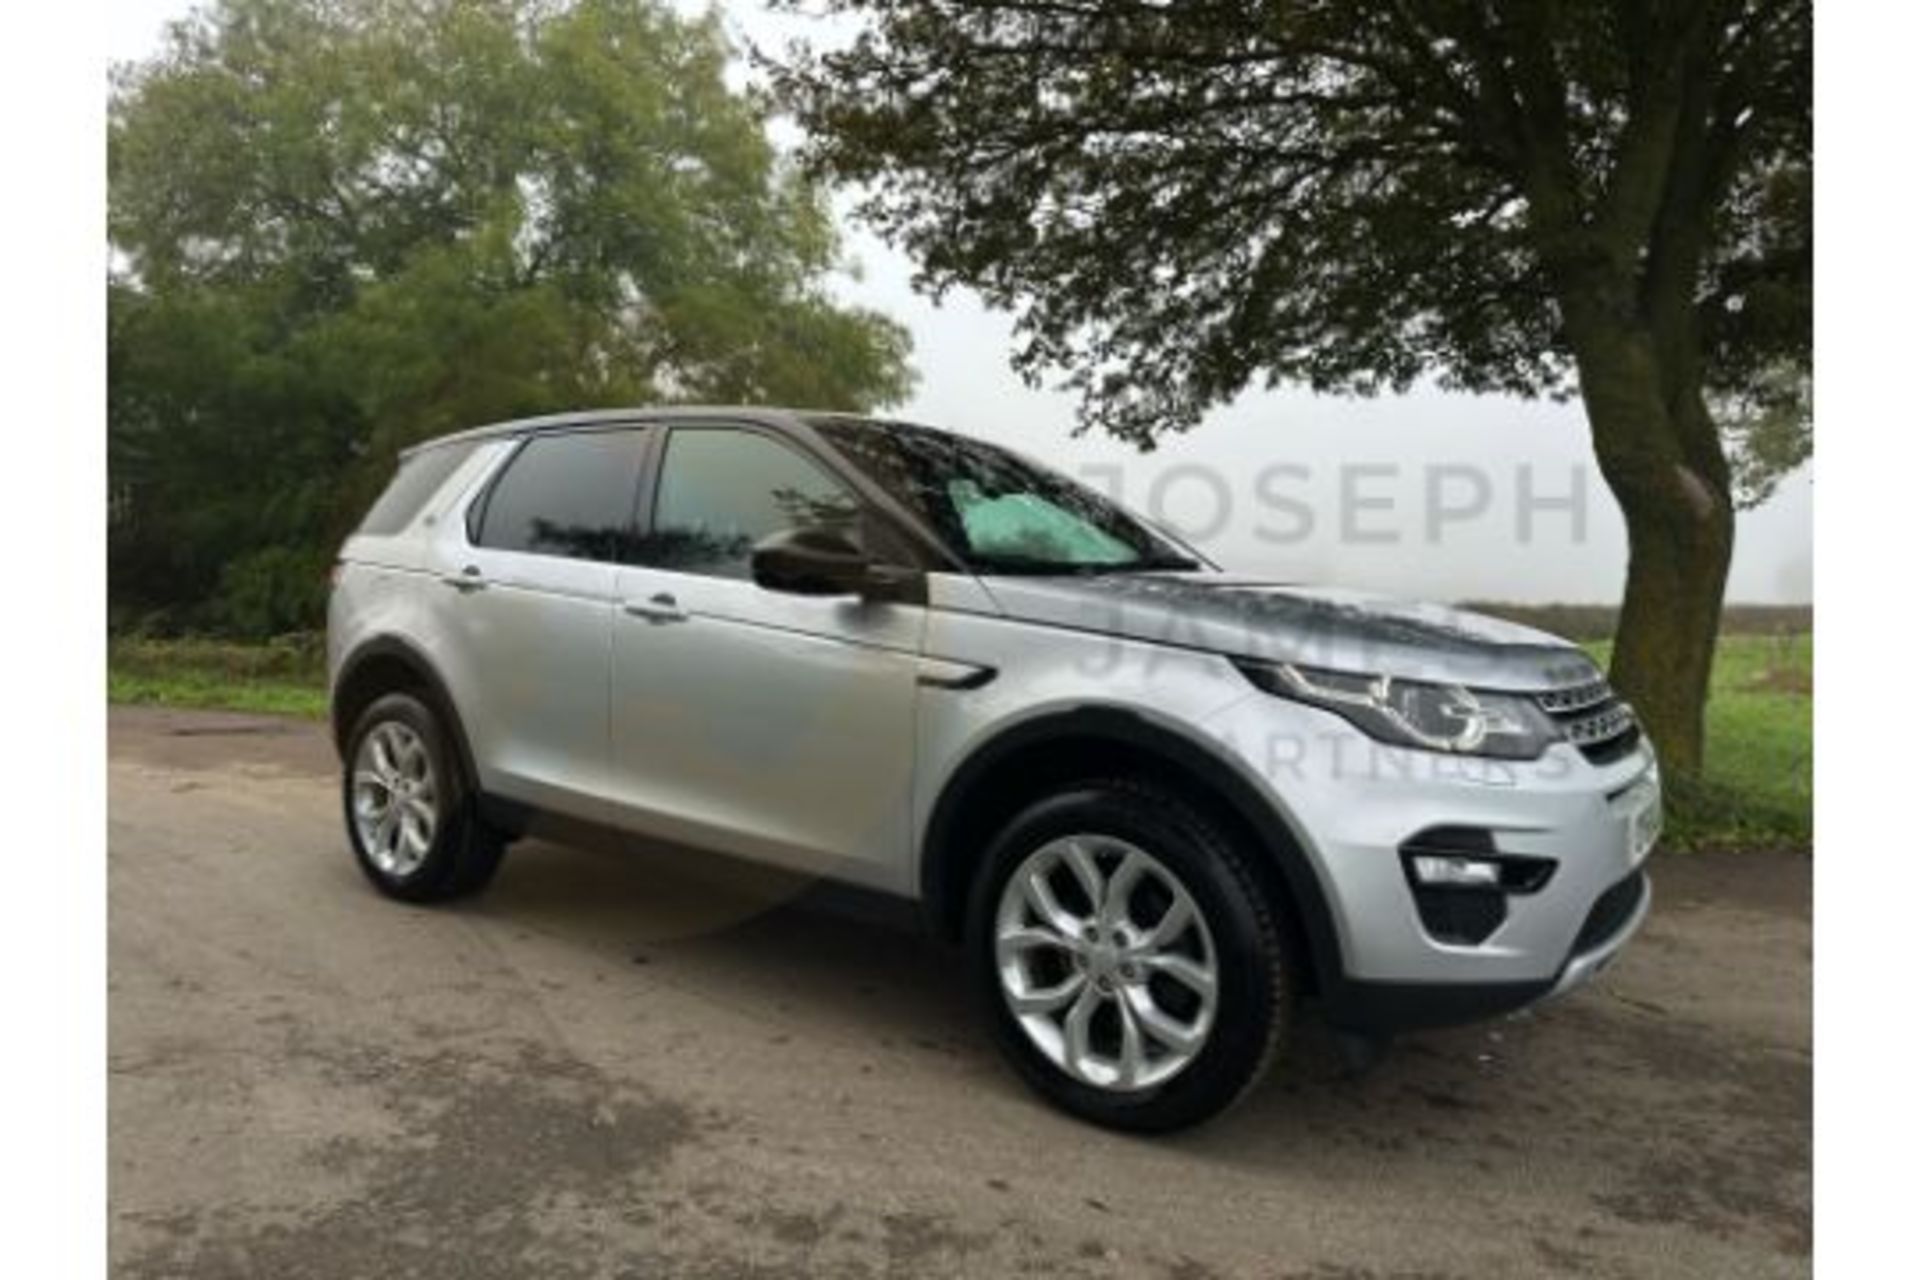 (ON SALE) LANDROVER DISCOVERY SPORT "HSE" EDITION 2.0 TD4 (180) AUTOMATIC - 68 REG - PAN ROOF - Image 3 of 51